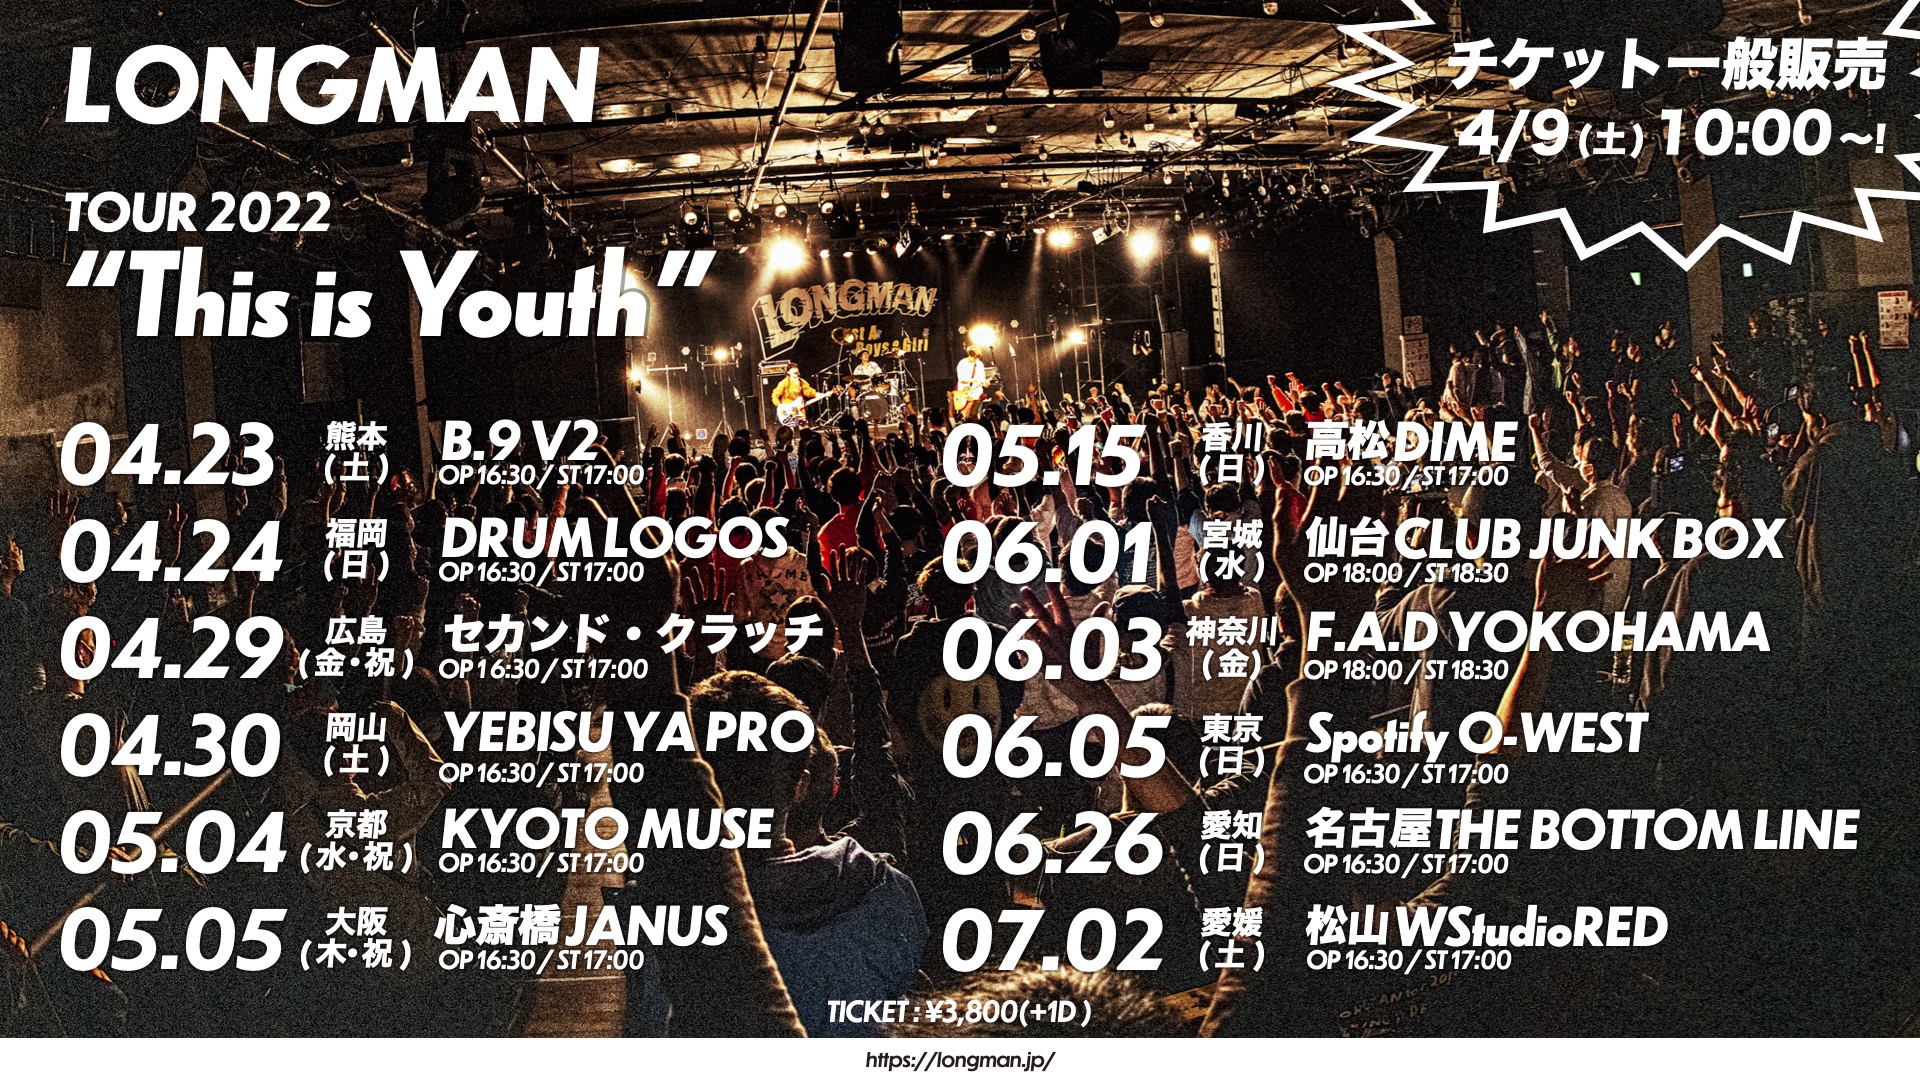 LONGMAN TOUR 2022 "This is Youth"